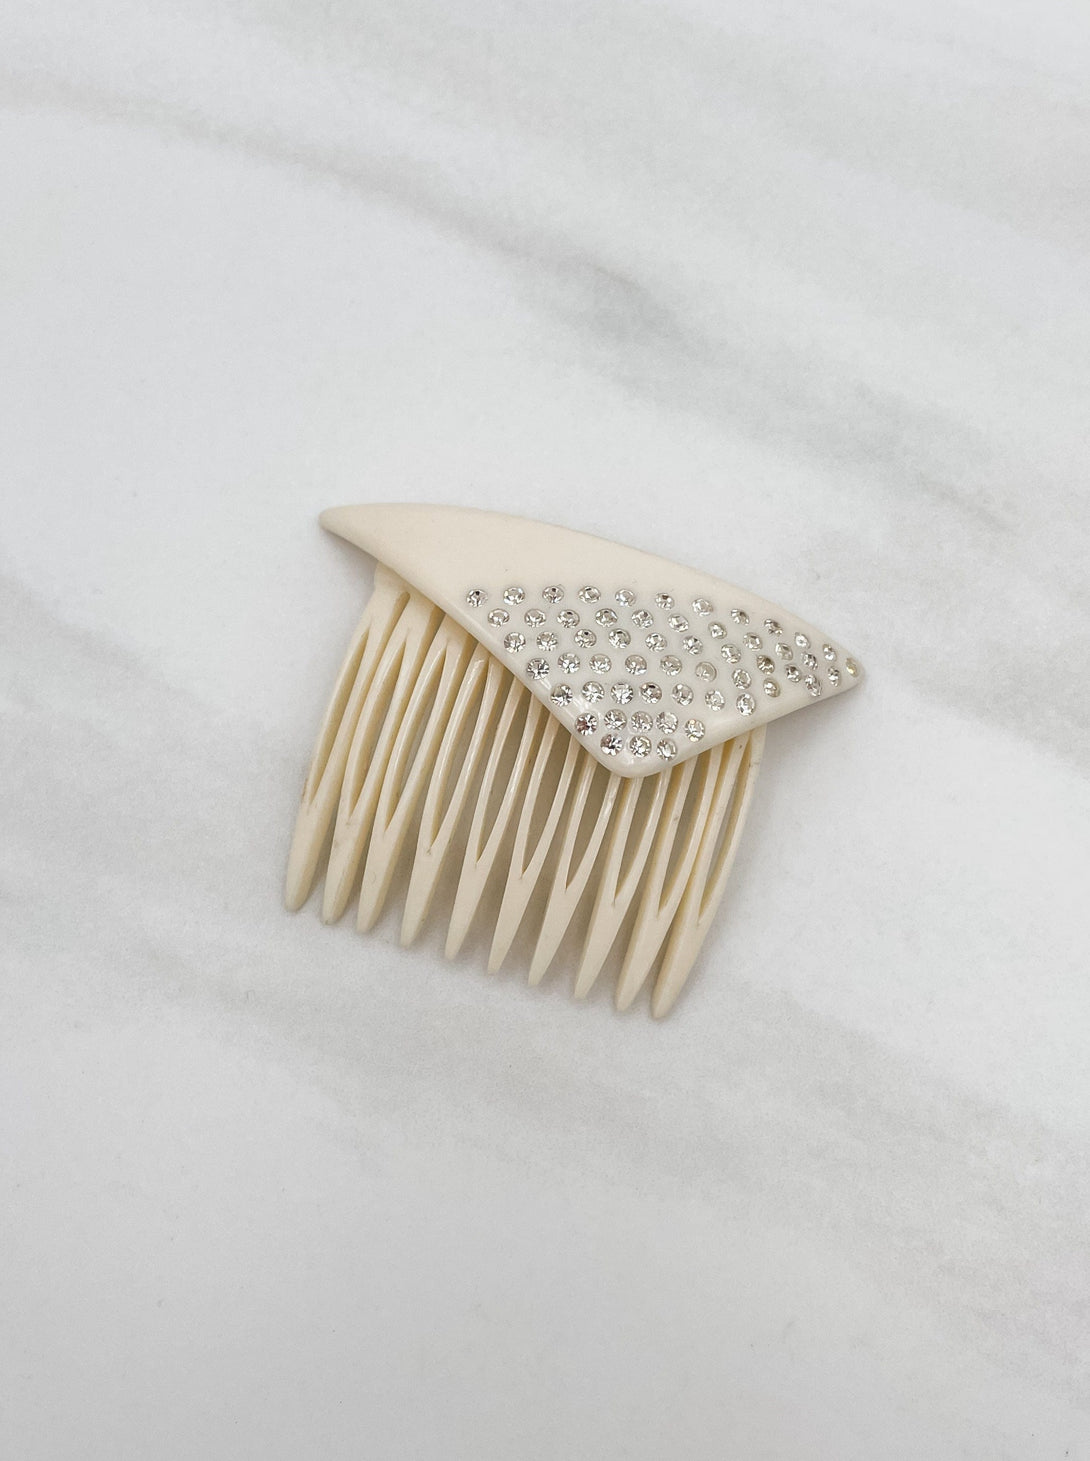 Small French Vintage Triangular Crystal Studded Hair Comb